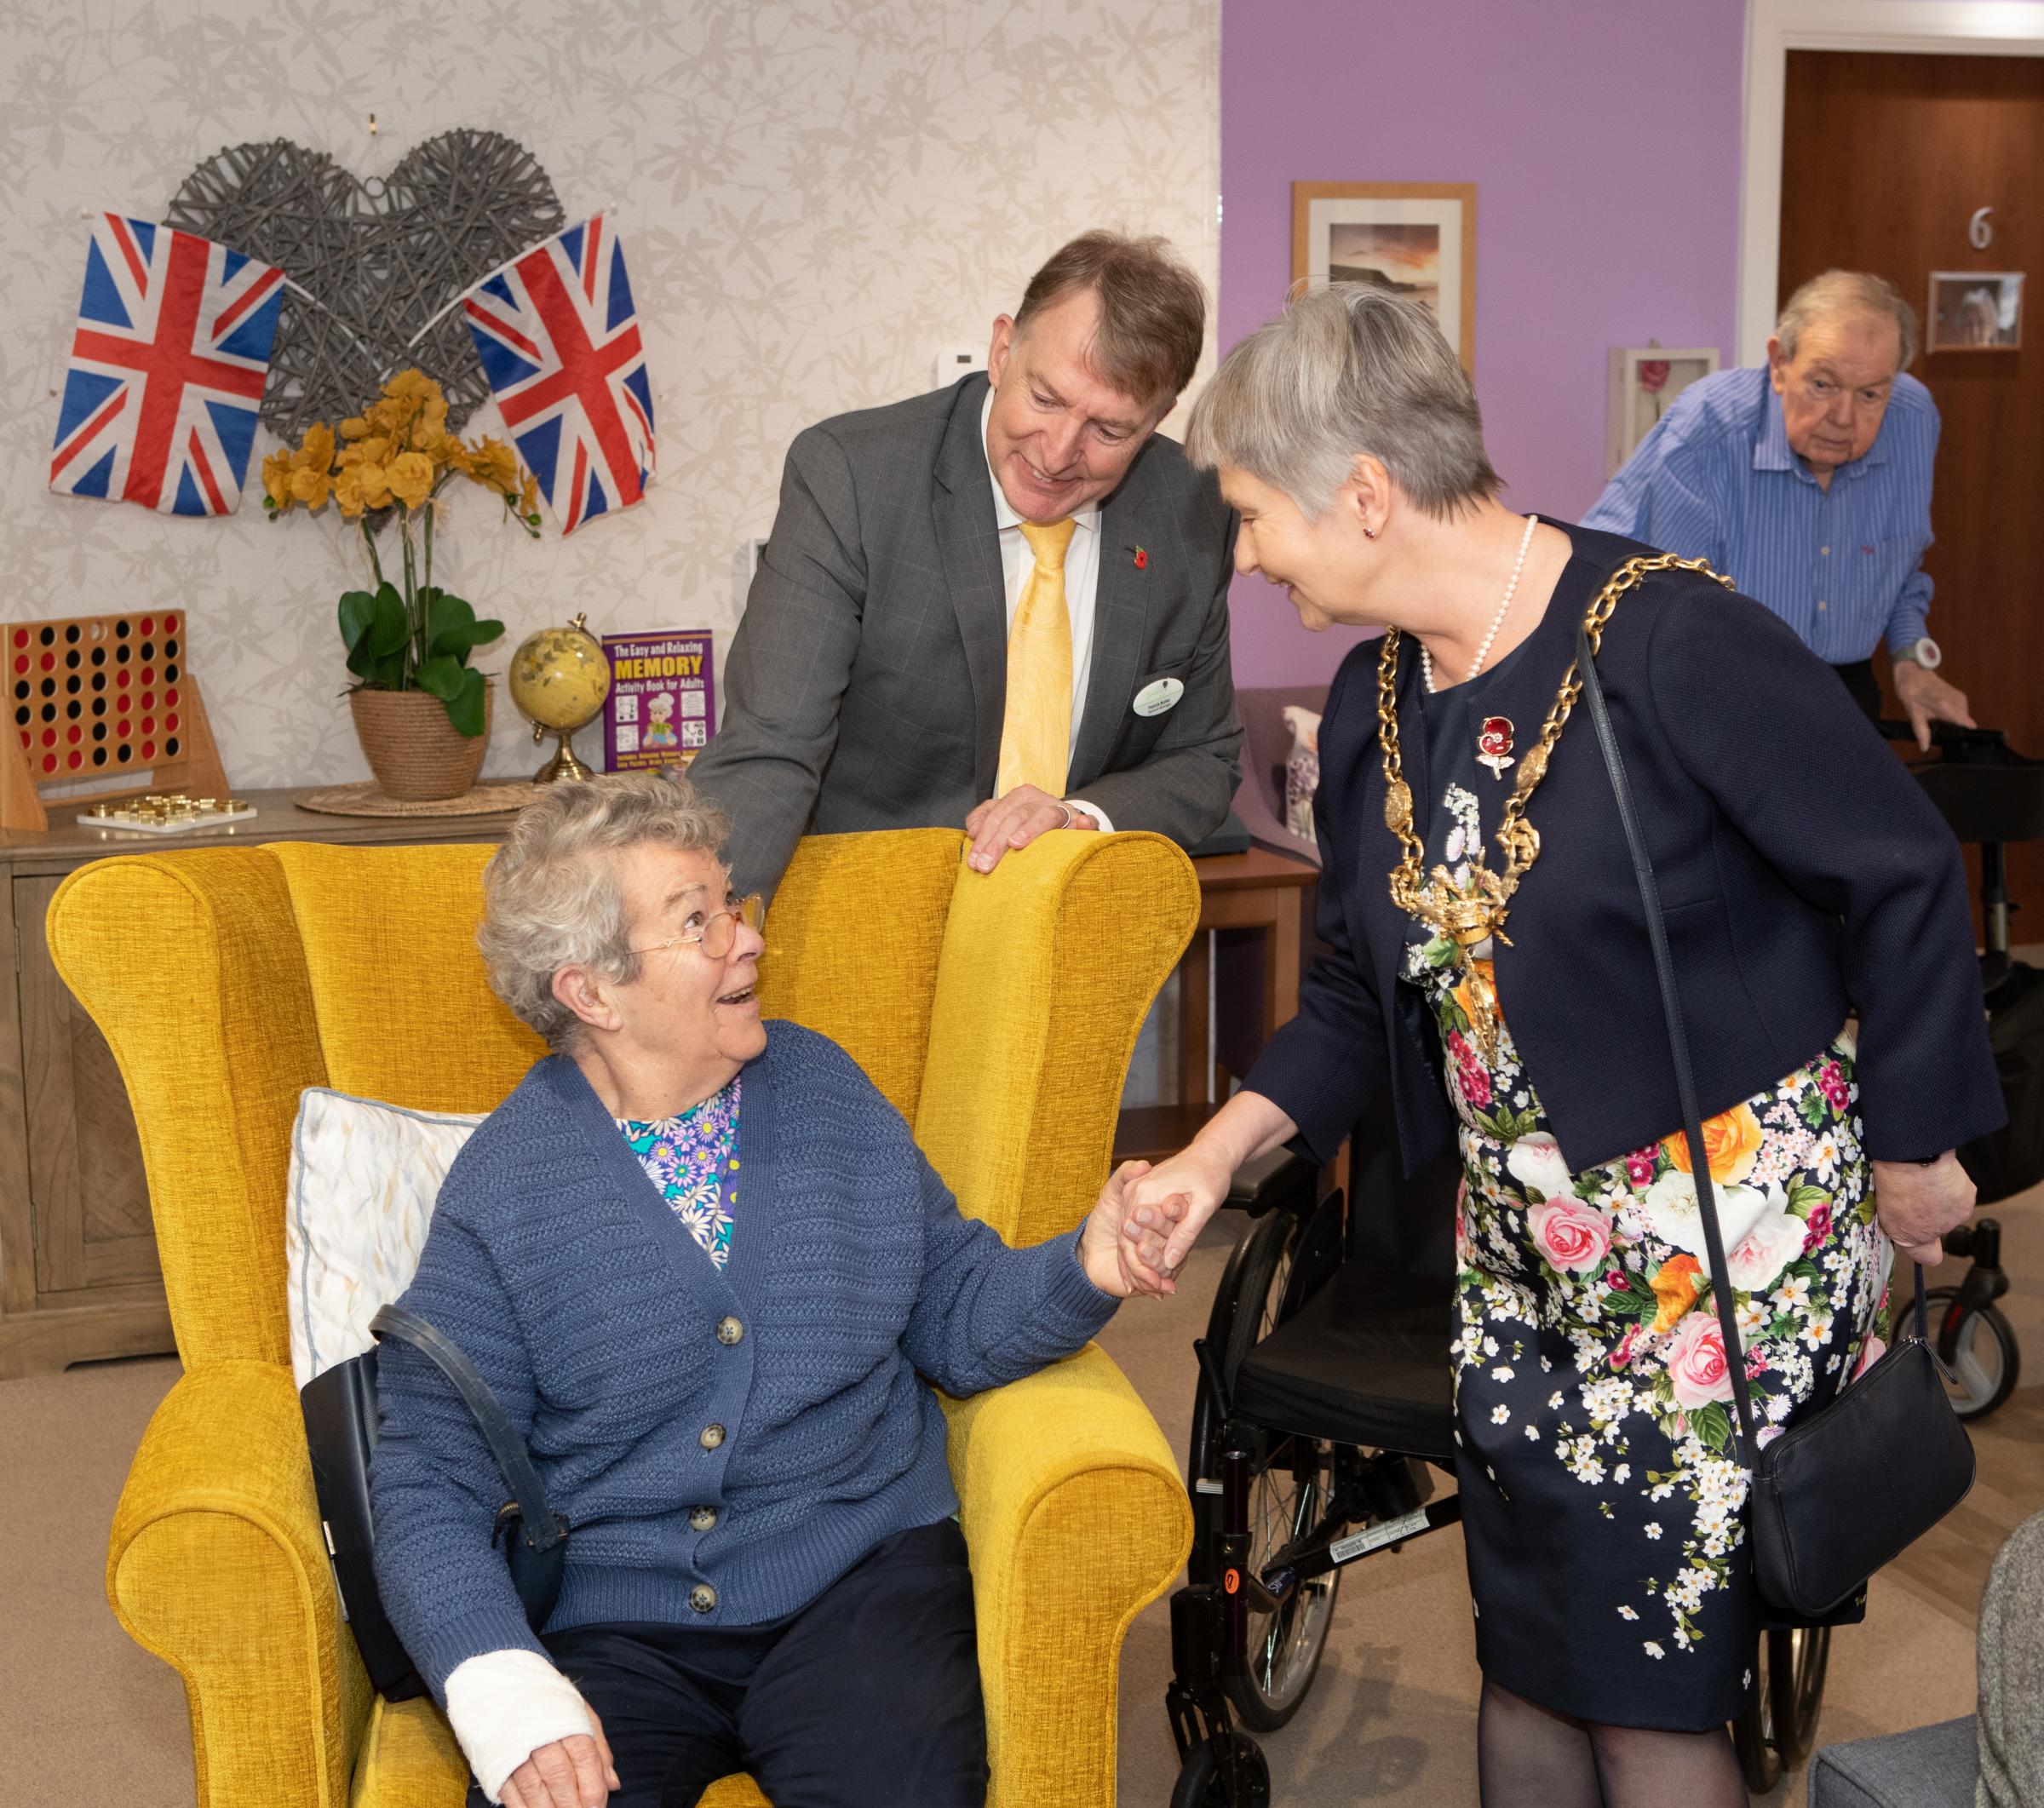 The Lord Mayor of Chester, Cllr Sheila Little (right), toured the village and met residents, including Barbara Harrison (left), with Belong Chester General Manager Patrick Butler (back).